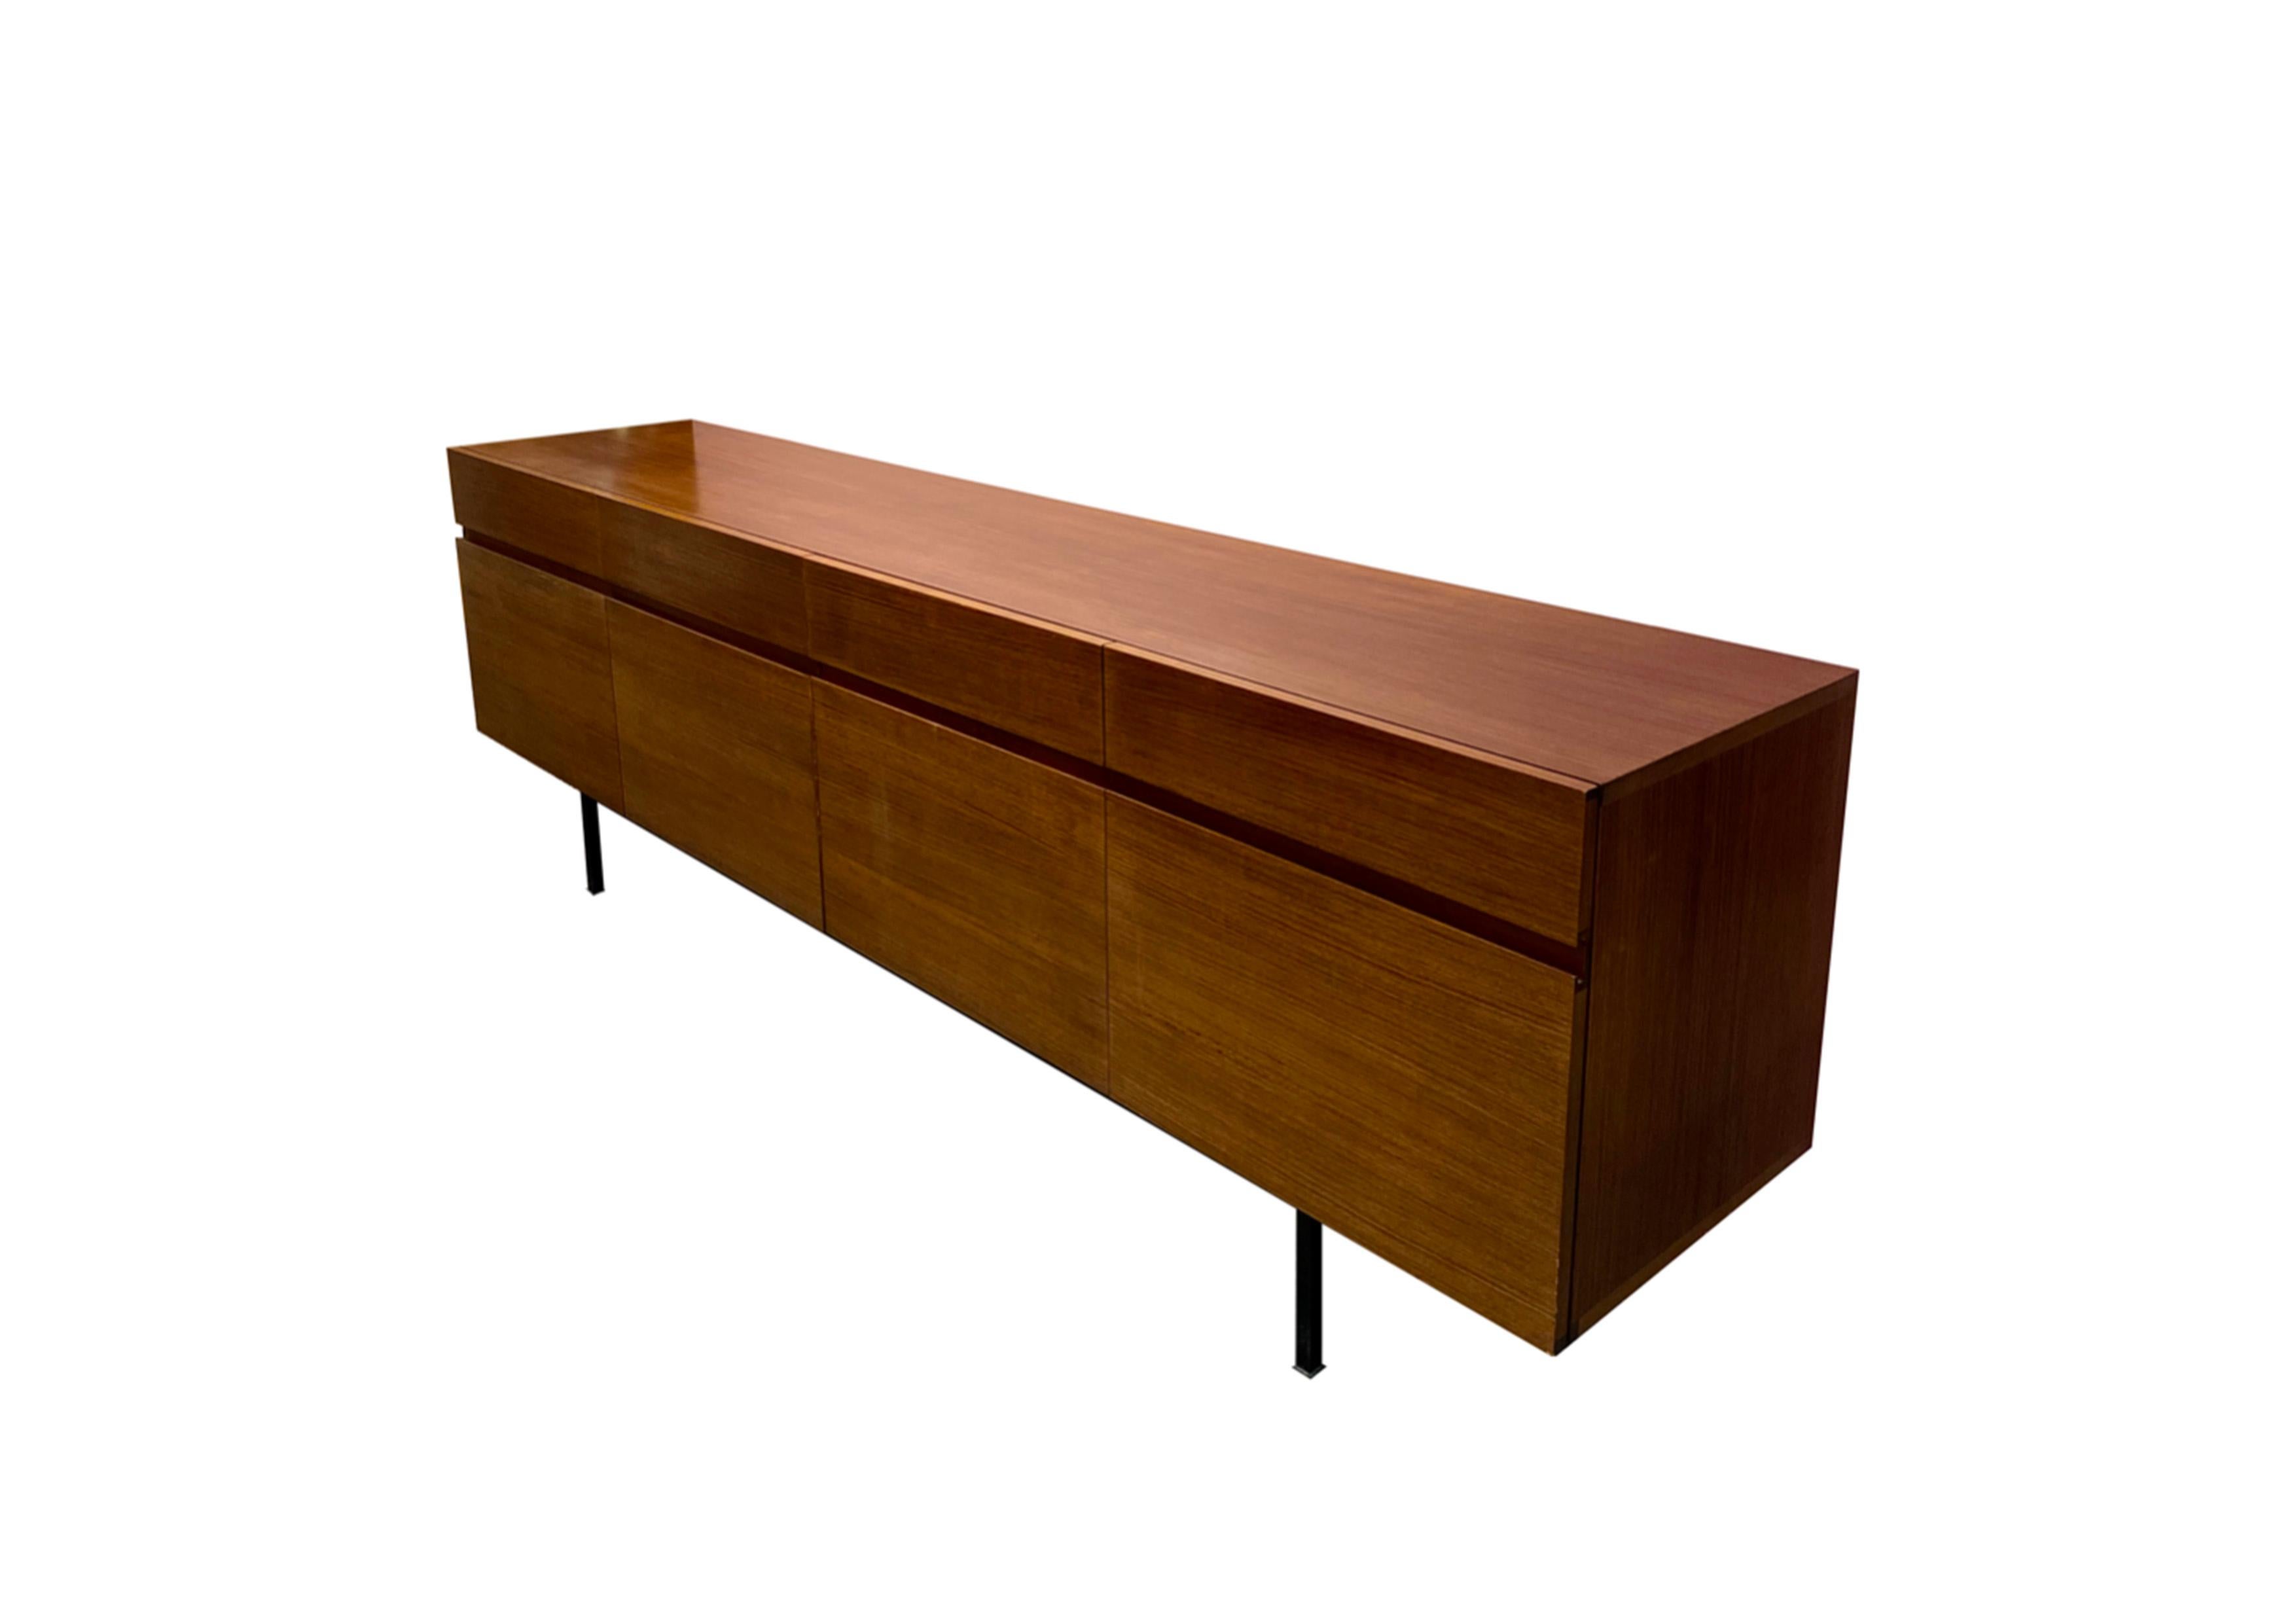 Teak sideboard on a black metal frame by Victoria Möbel, swiss design Circa 1960. 

Composed of 4 upper drawers and 4 flap doors with interior shelves. 
2 drawers contain felt organiser compartments.

